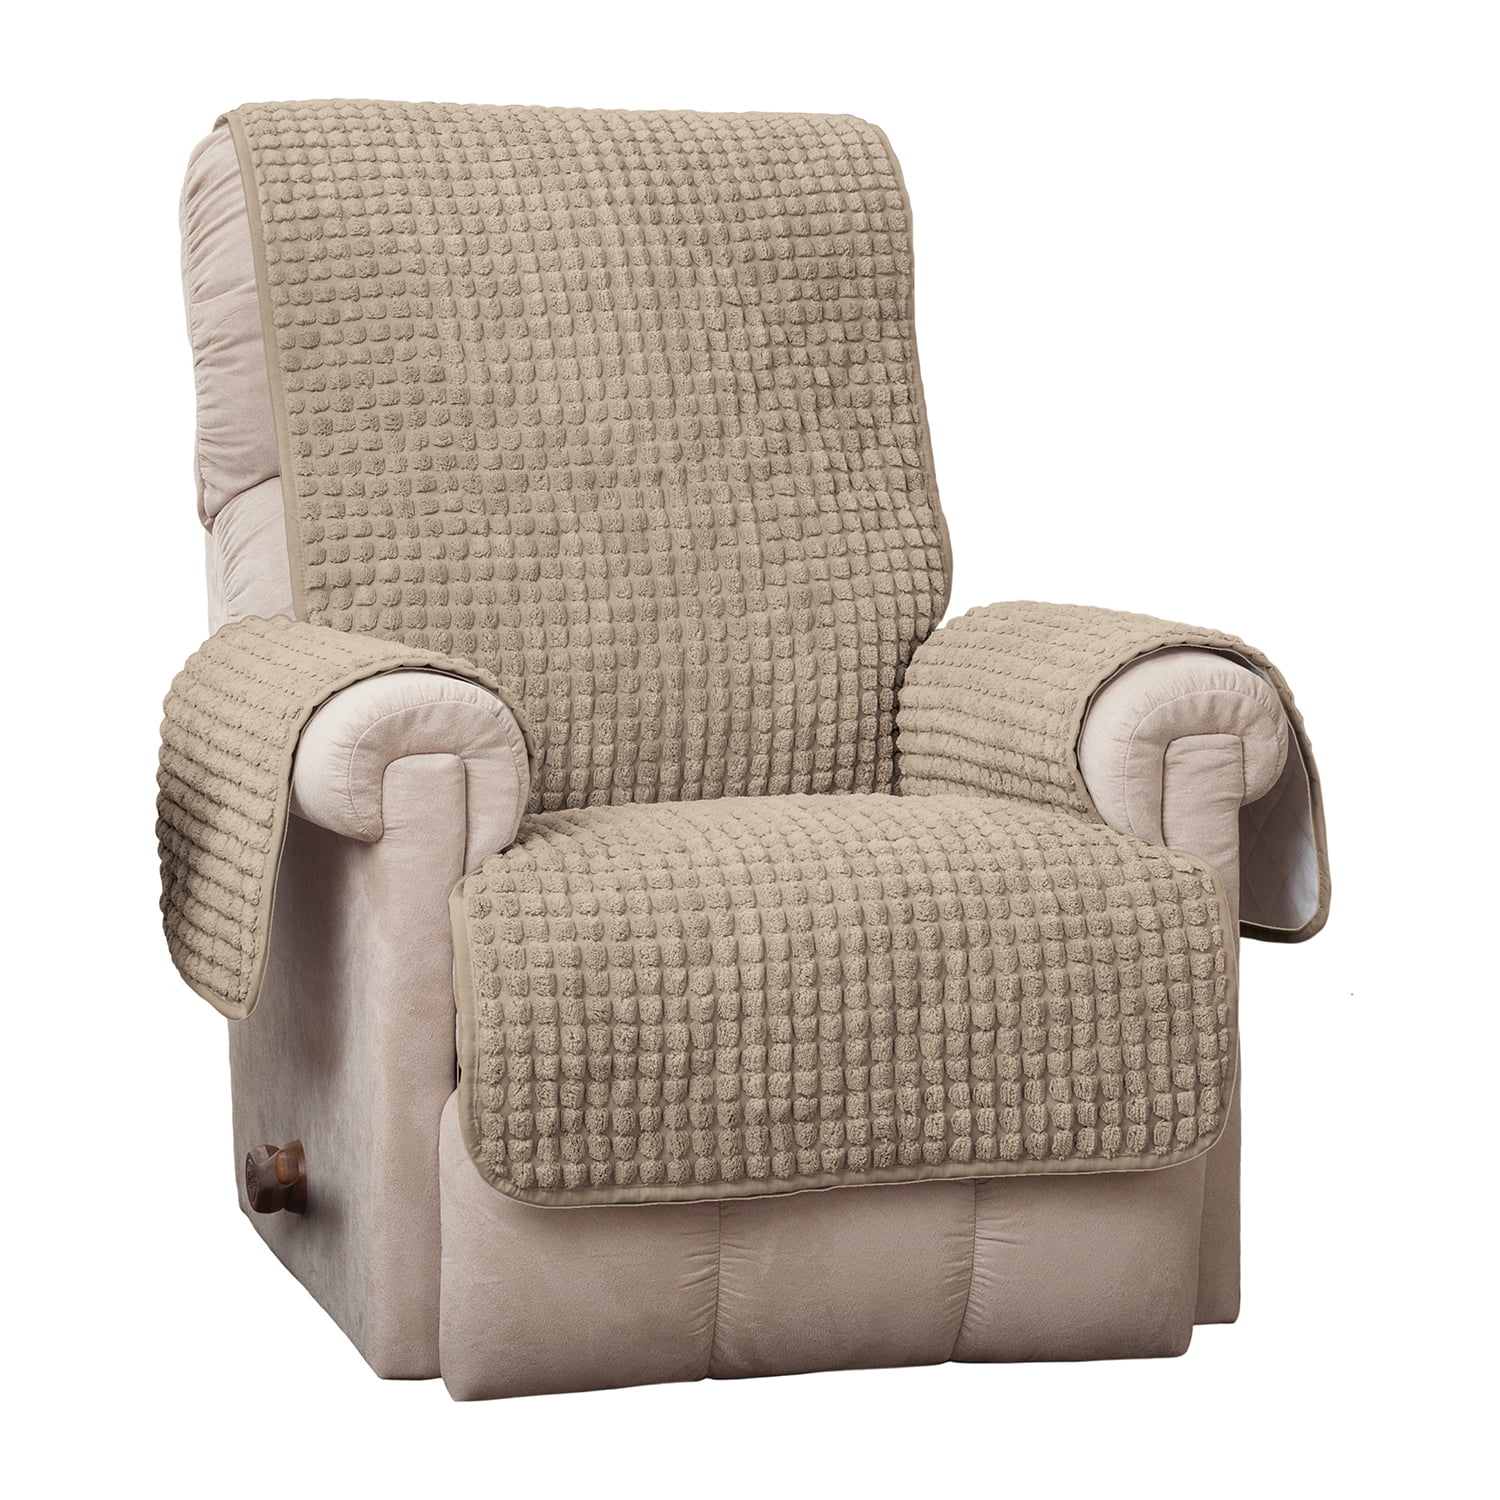 Creatice Recliner Chair Covers Walmart for Small Space